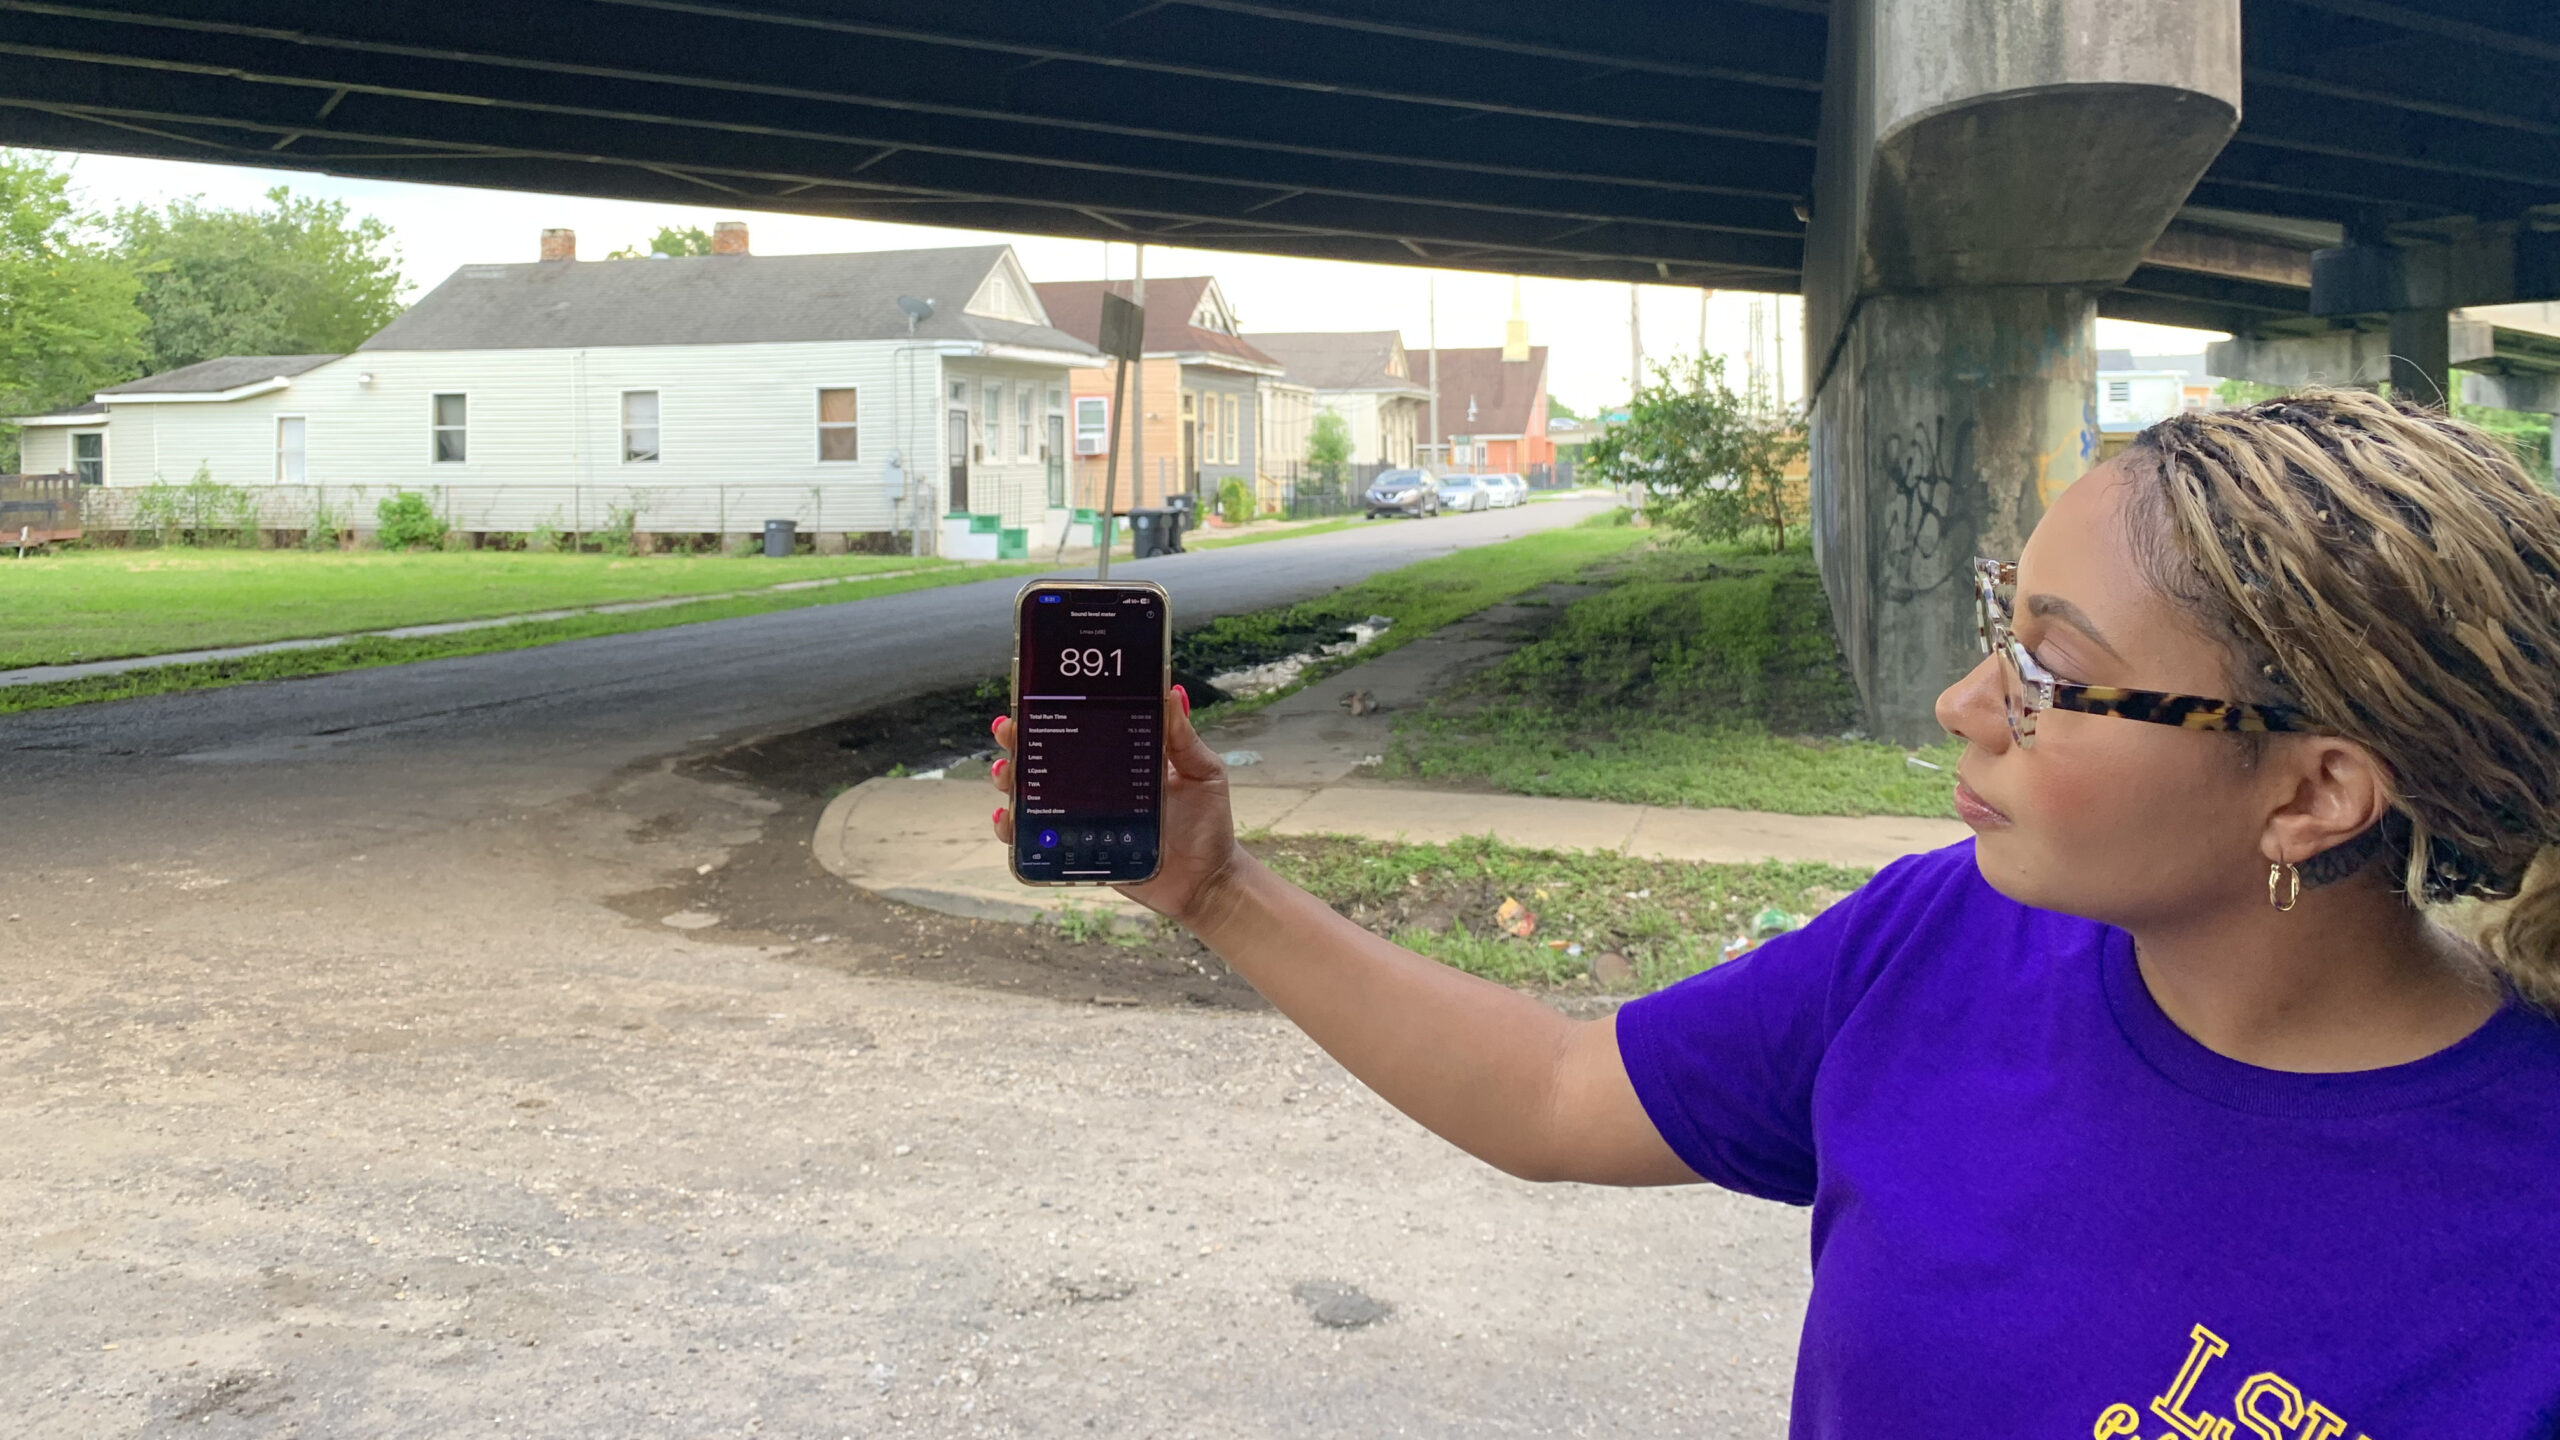 A New Orleans neighborhood confronts the racist legacy of a toxic stretch of highway